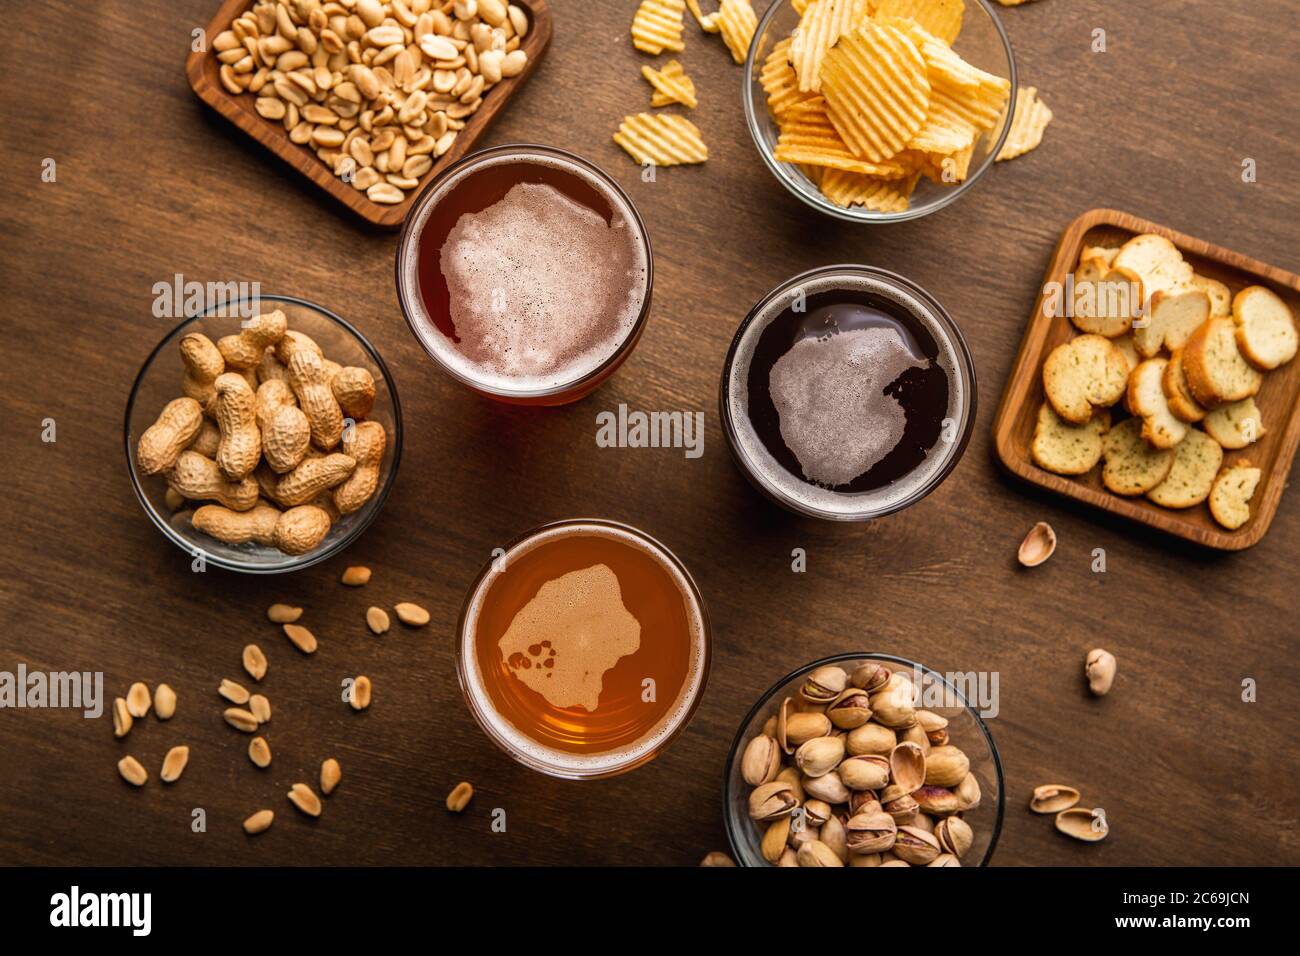 Client service in pub. Dark, light, unfiltered beer in glasses, nuts and chips in plates Stock Photo